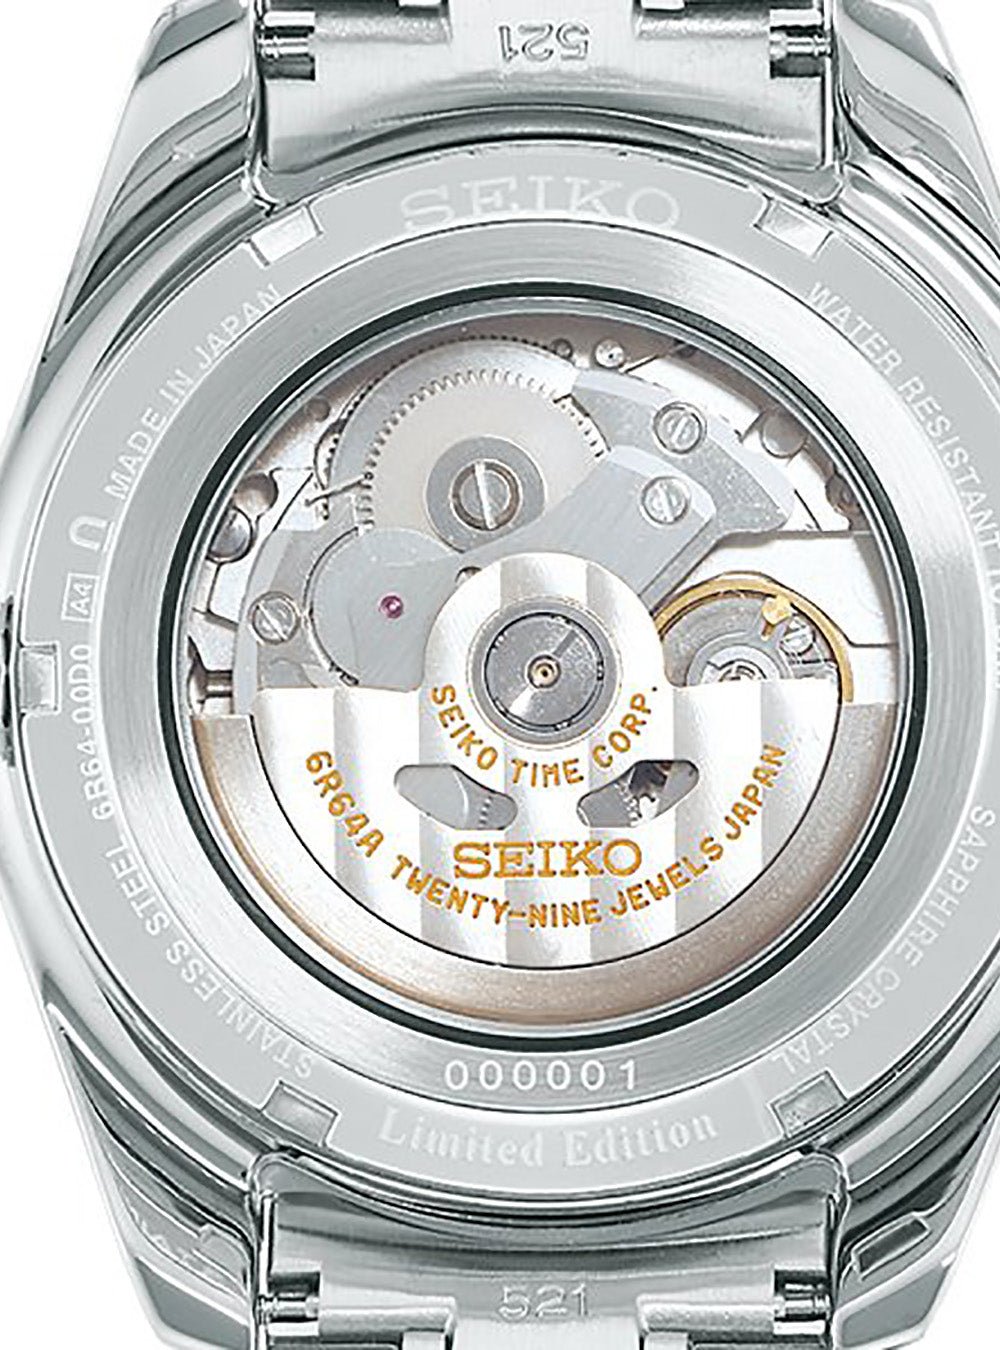 SEIKO MECHANICAL PRESAGE 140TH ANNIVERSARY SARF007 LIMITED EDITION MADE IN JAPAN JDMWRISTWATCHjapan-select